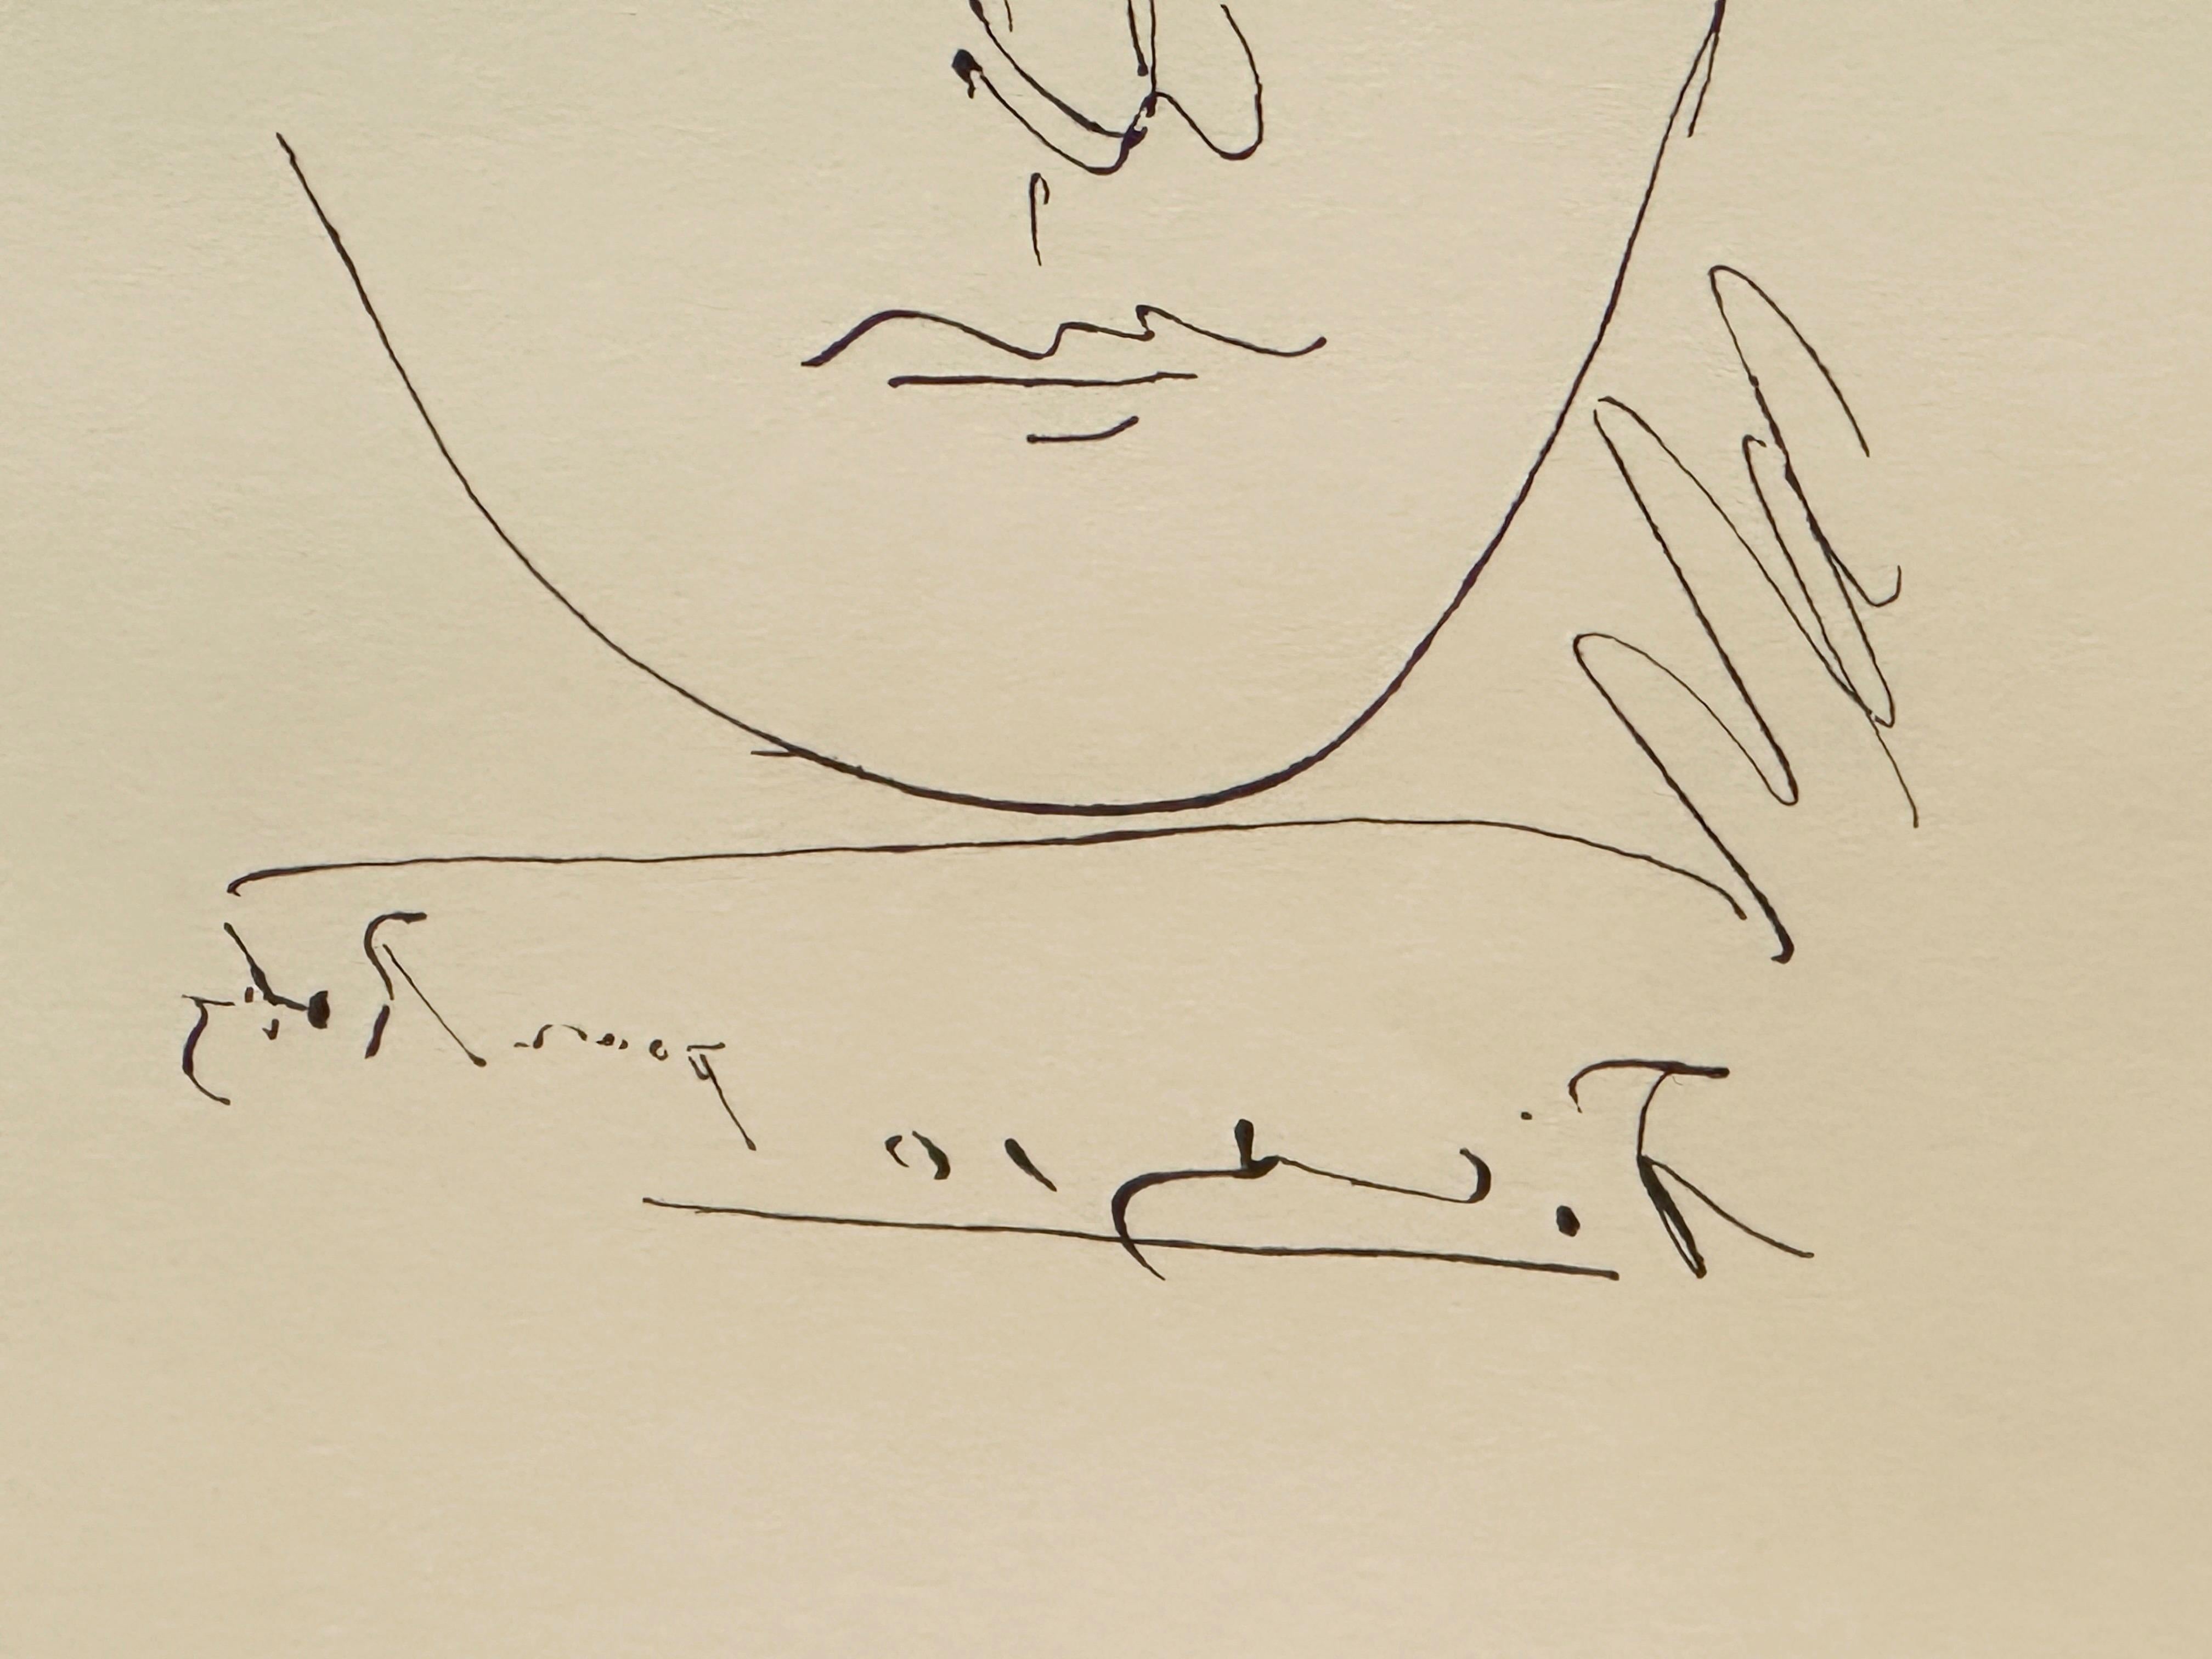 Applying a precious quality to the limitation of line, Picasso has captured the character of a close friend: Robert Godet, also known as Roby. 
Picasso initially drew this portrait for his friend. He later etched the portrait onto a printing plate